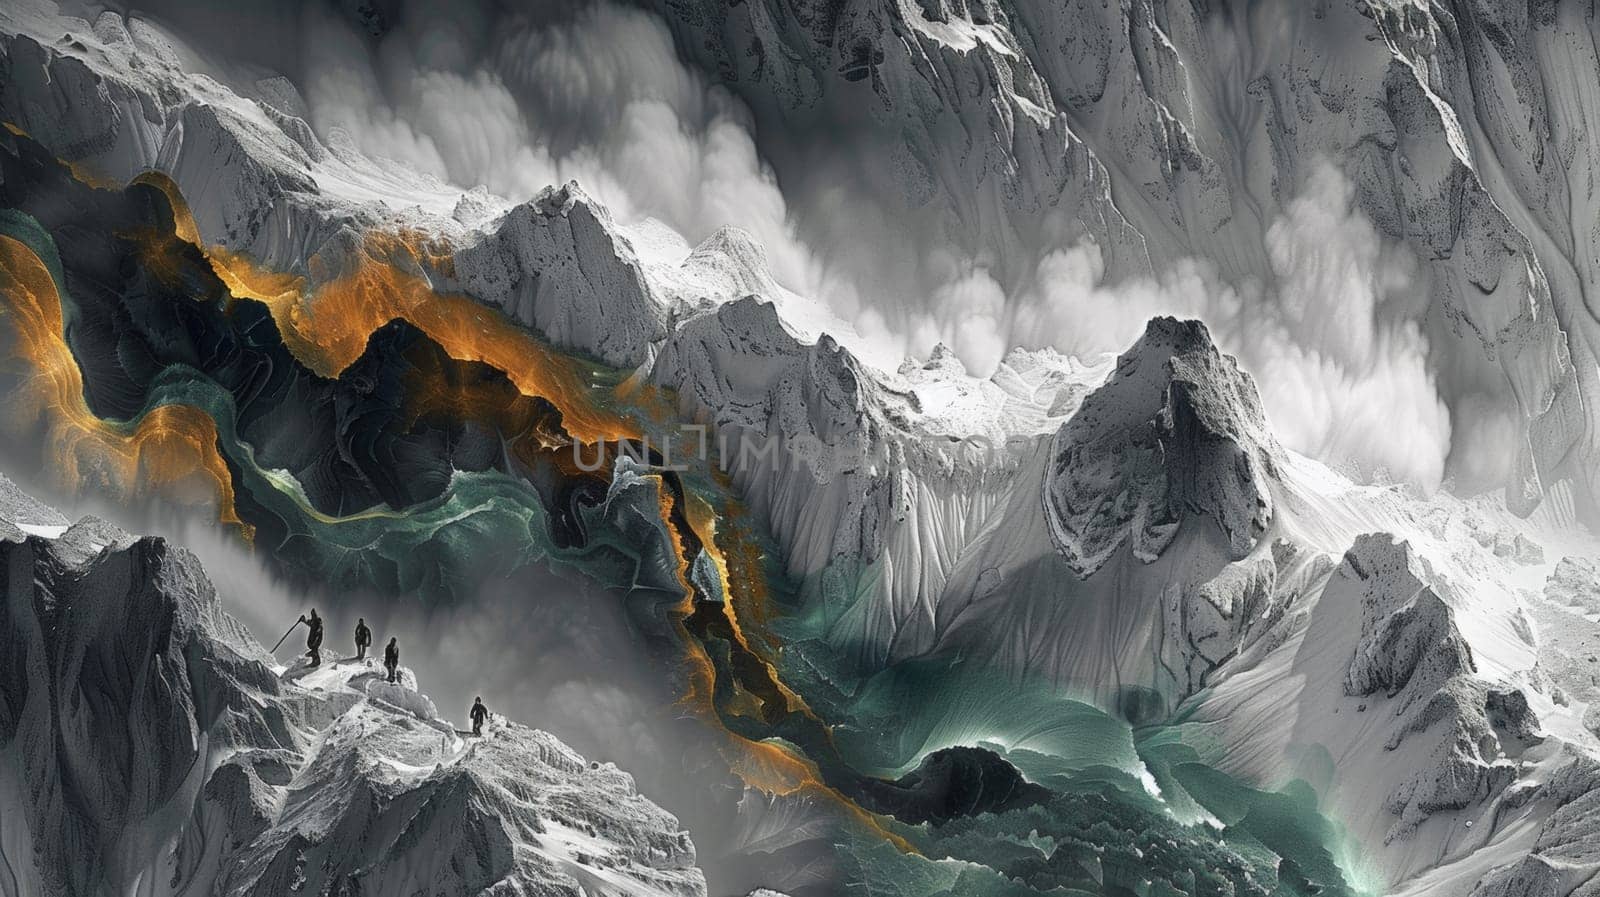 A painting of a mountain with orange and yellow flames